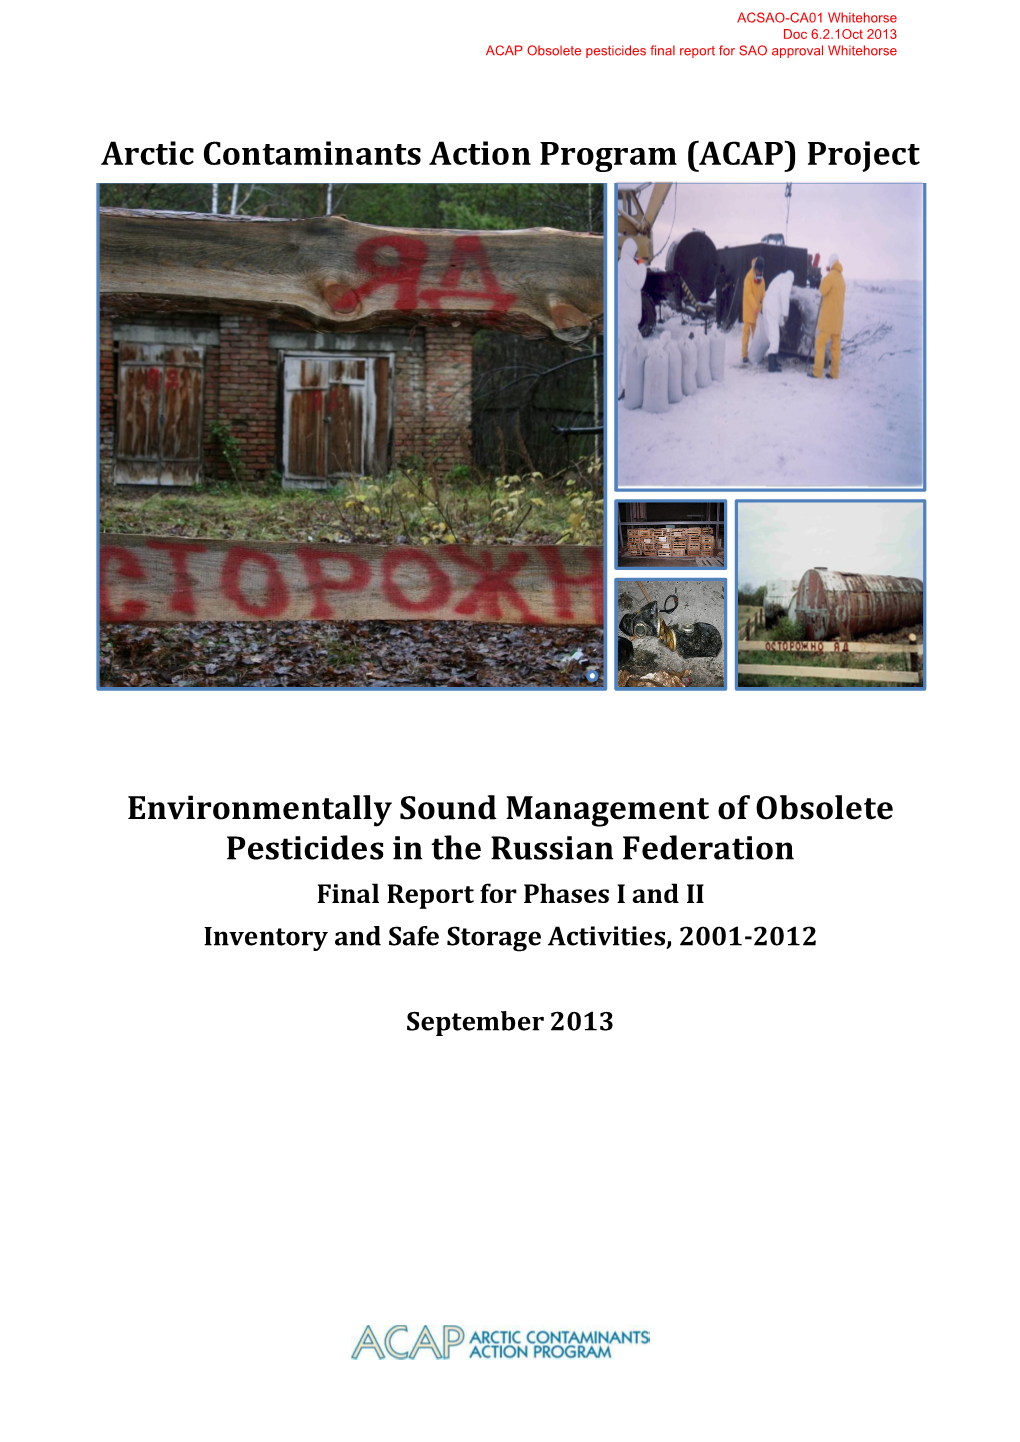 (ACAP) Project Environmentally Sound Management of Obsolete Pesticides in the Russian Federat